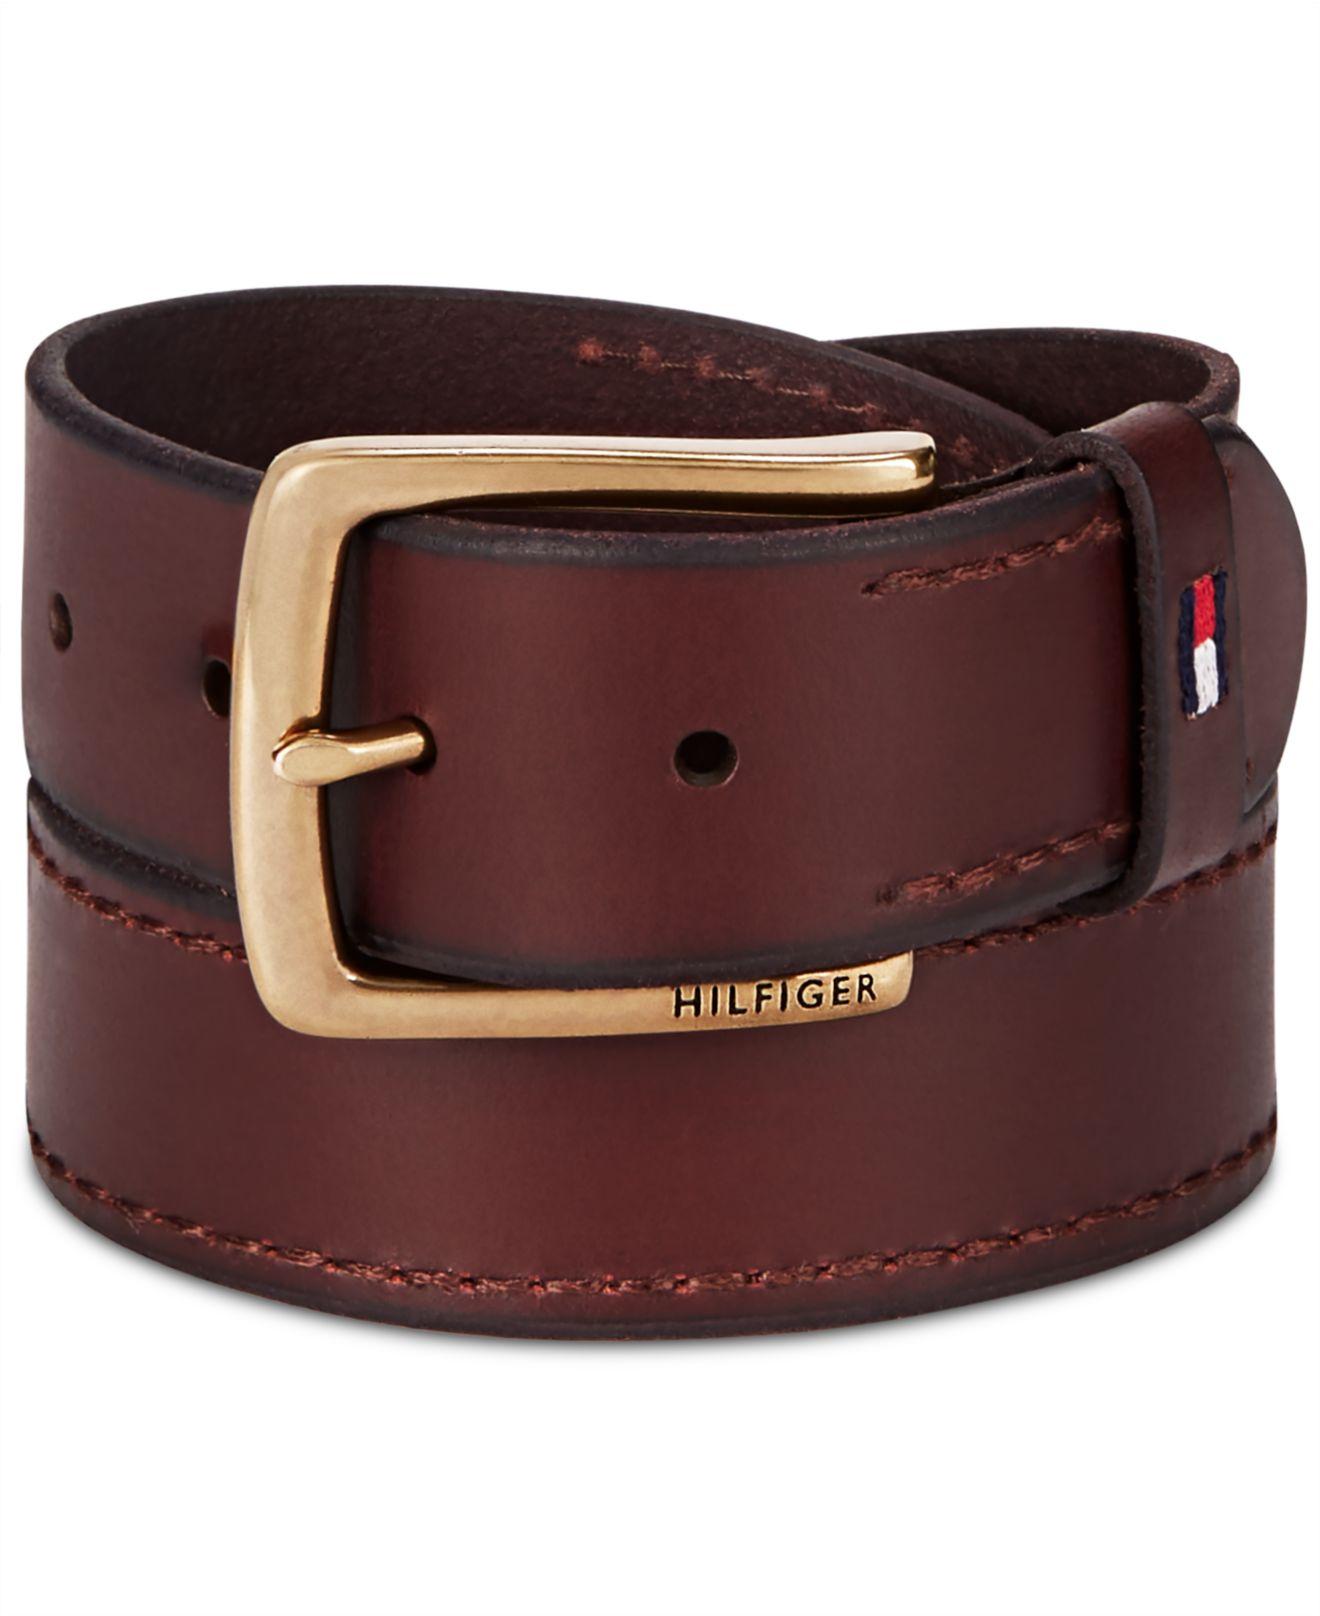 Tommy Hilfiger Casual Leather Belt in Brown for Men - Lyst